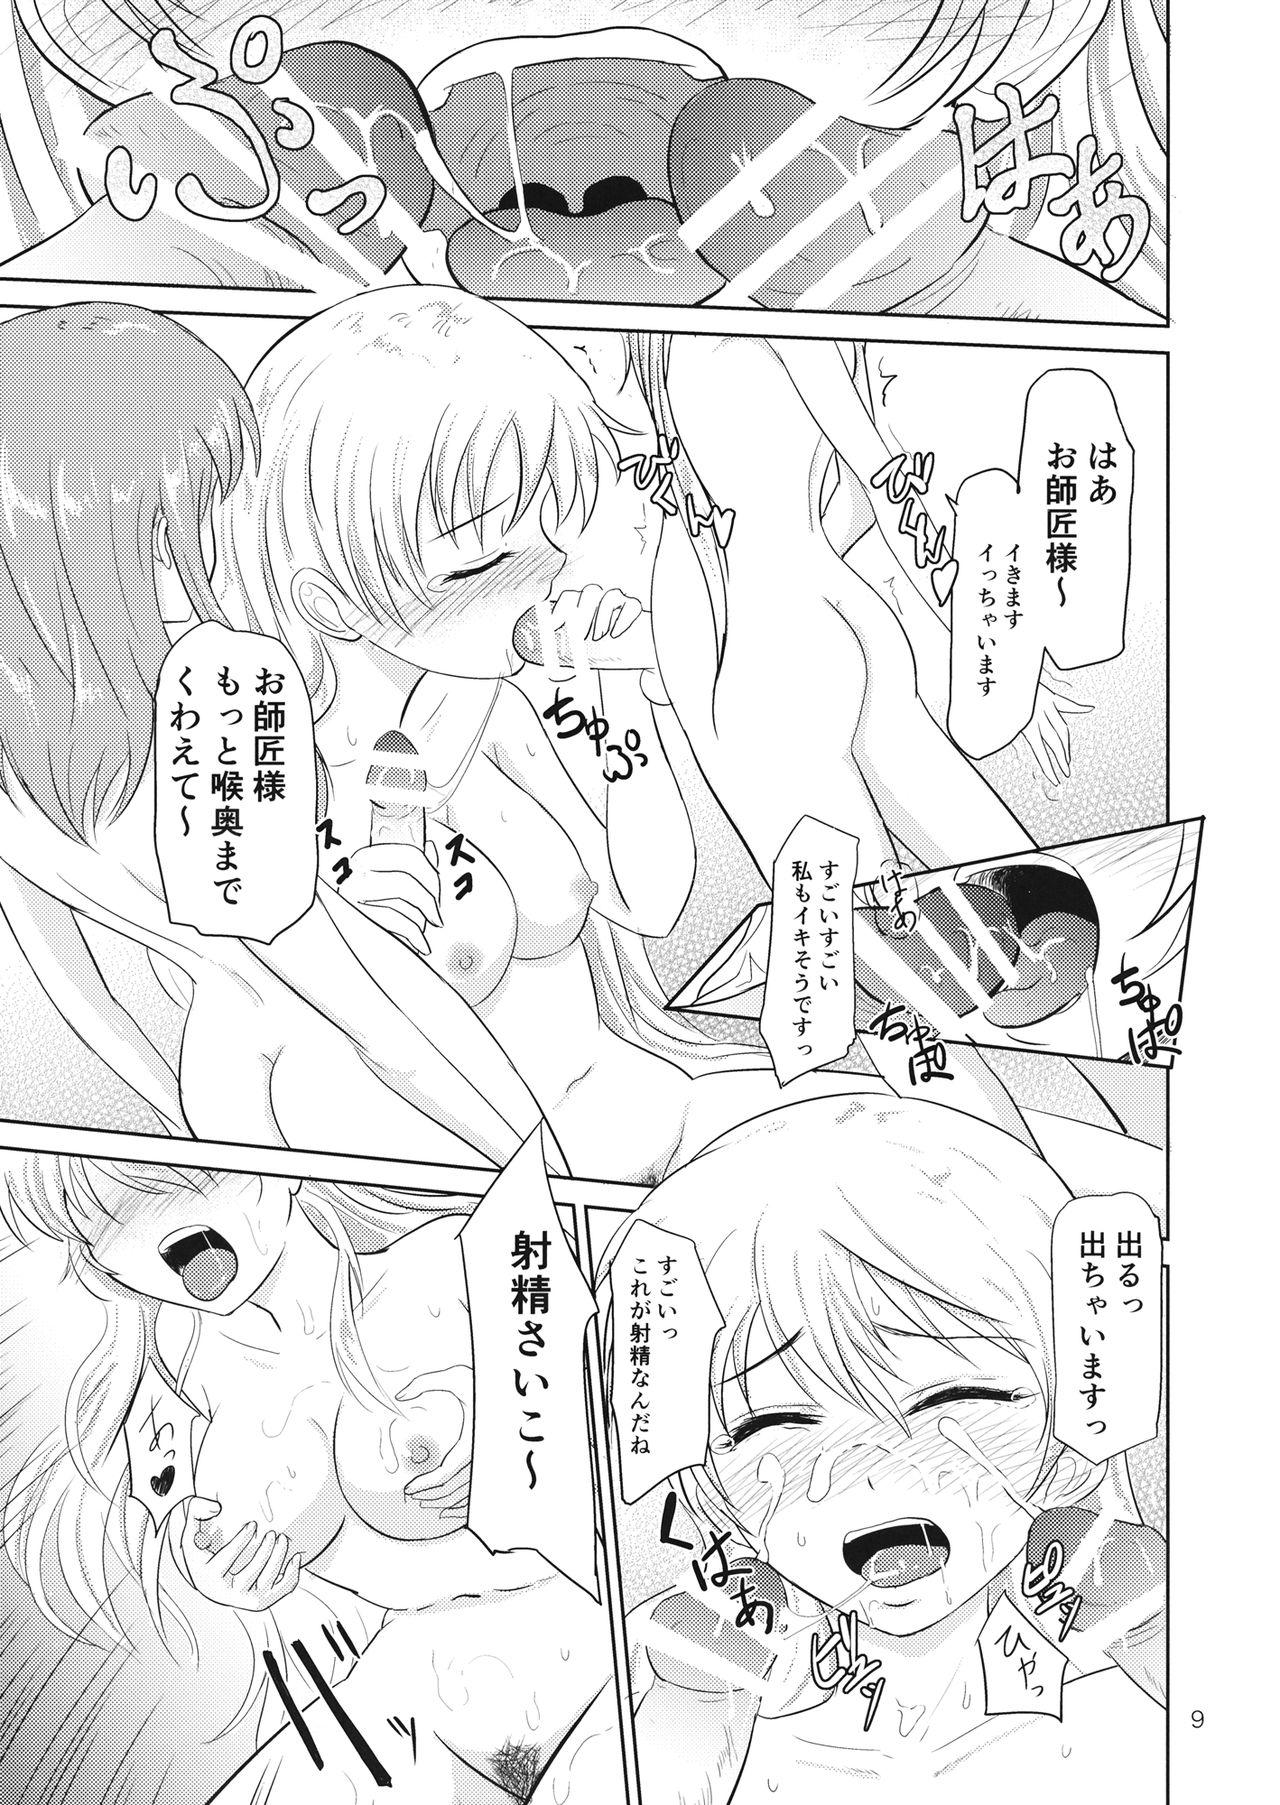 Male Crazy Gekokujou - Touhou project 18 Year Old Porn - Page 10